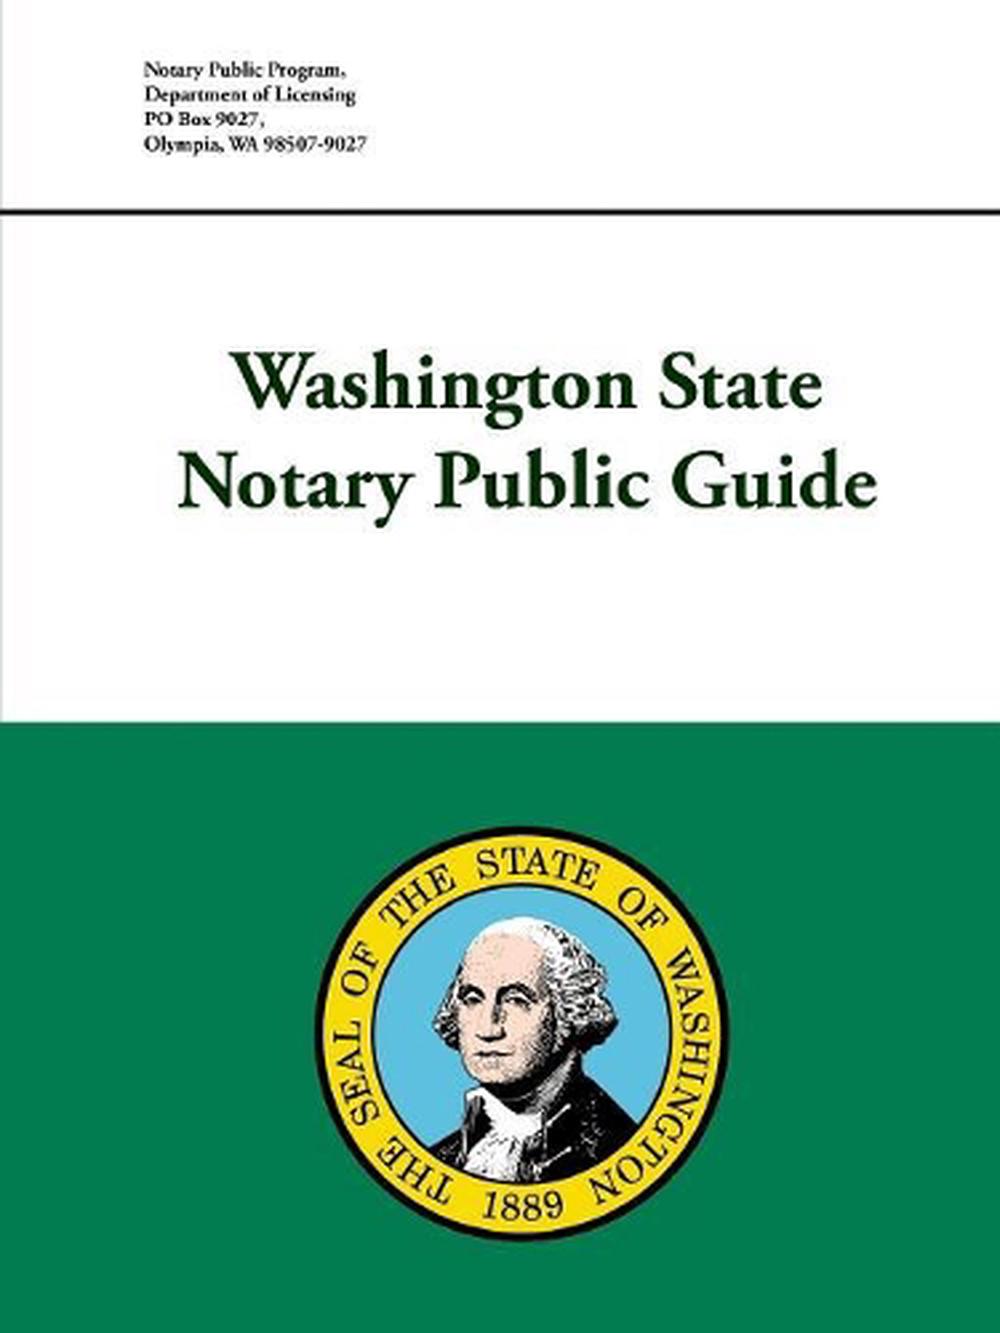 does a will have to be notarized in washington state